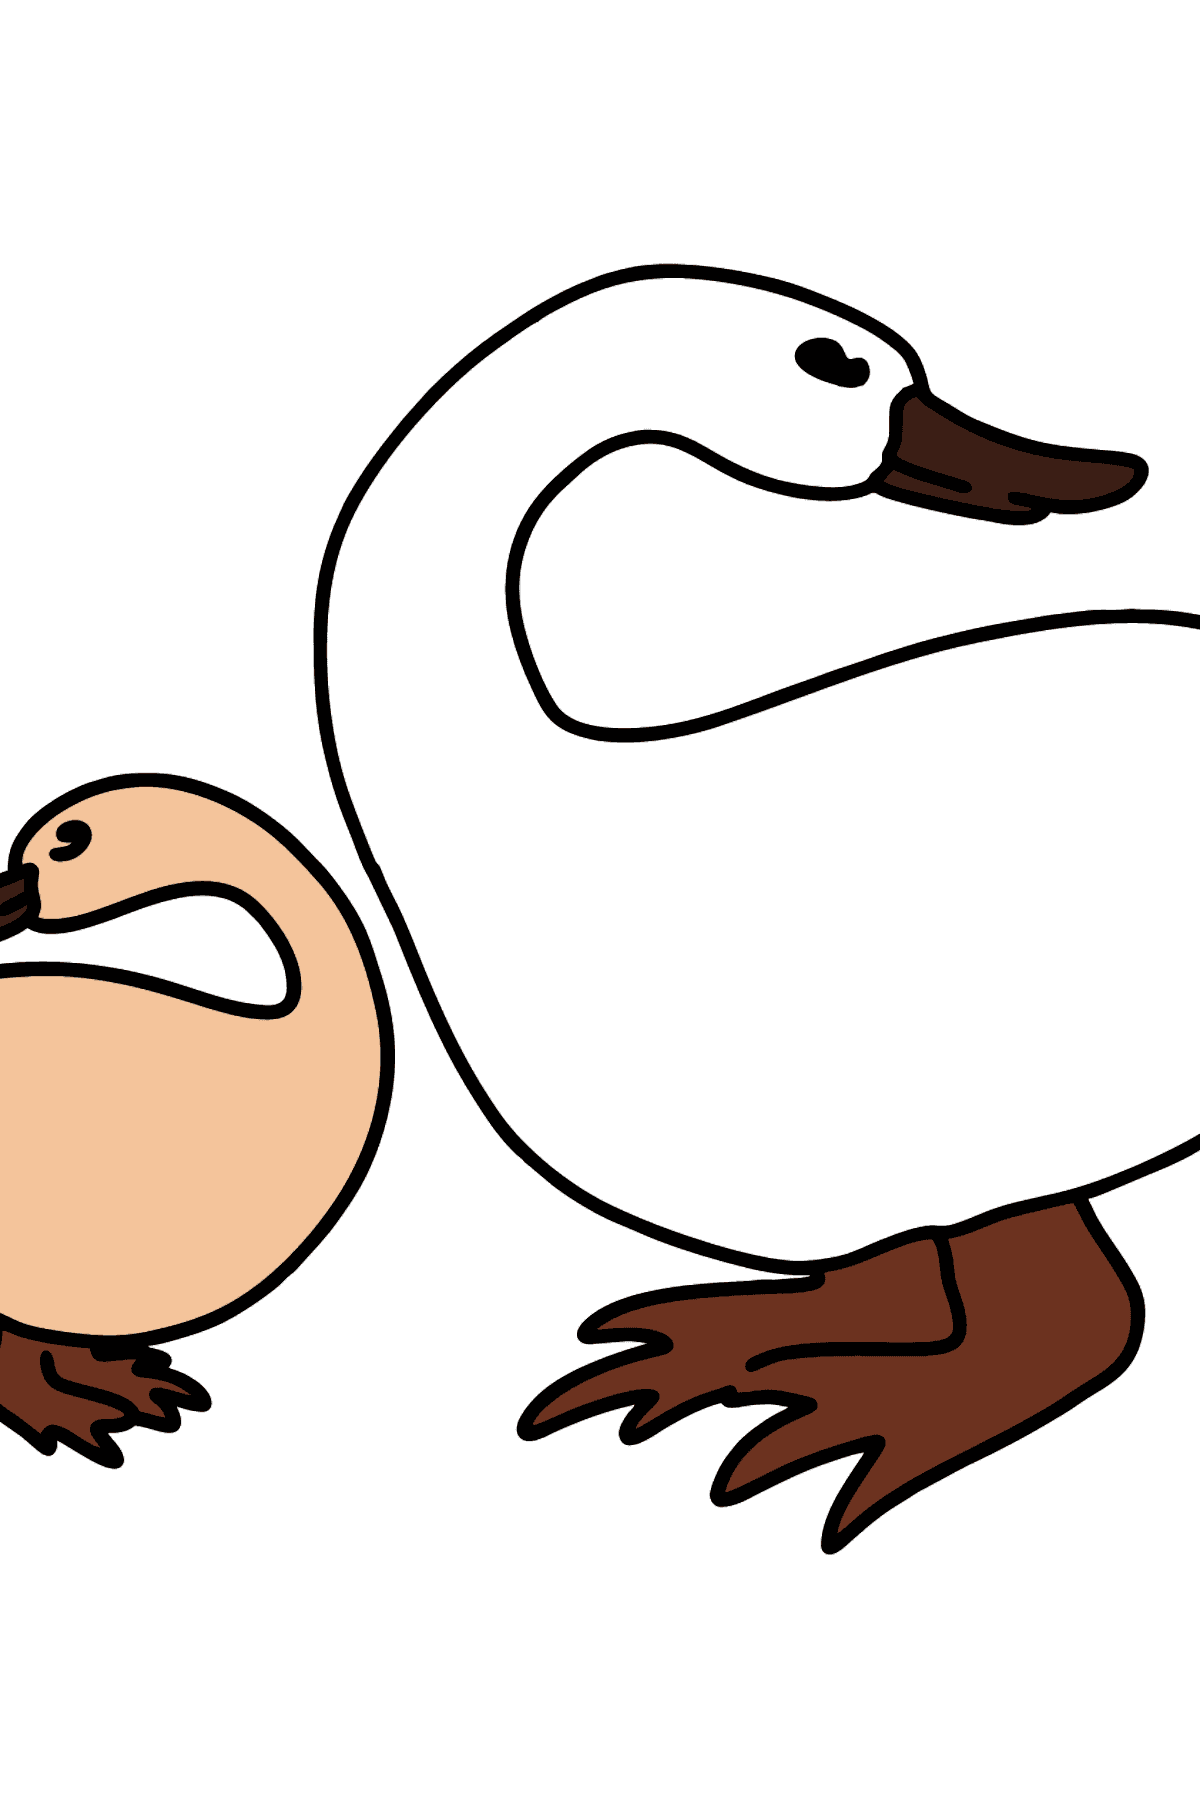 Duck with Duckling coloring page - Coloring Pages for Kids